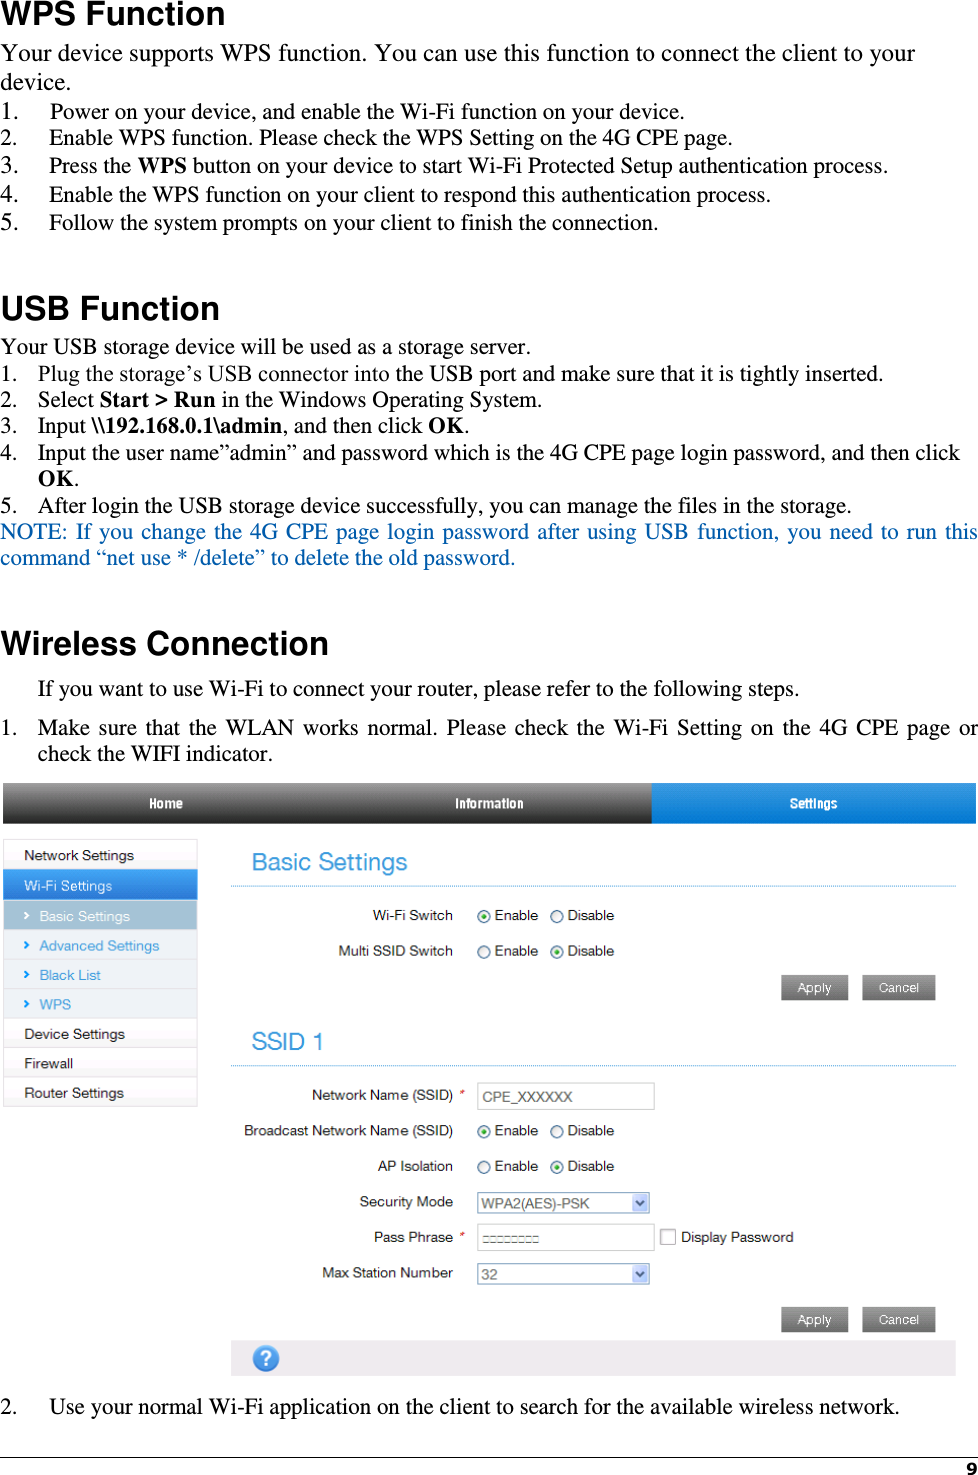 9 WPS Function Your device supports WPS function. You can use this function to connect the client to your device. 1.  Power on your device, and enable the Wi-Fi function on your device. 2.   Enable WPS function. Please check the WPS Setting on the 4G CPE page. 3.   Press the WPS button on your device to start Wi-Fi Protected Setup authentication process. 4.   Enable the WPS function on your client to respond this authentication process. 5.   Follow the system prompts on your client to finish the connection.  USB Function Your USB storage device will be used as a storage server. 1. Plug the storage’s USB connector into the USB port and make sure that it is tightly inserted.   2. Select Start &gt; Run in the Windows Operating System.   3. Input \\192.168.0.1\admin, and then click OK. 4. Input the user name”admin” and password which is the 4G CPE page login password, and then click OK.   5. After login the USB storage device successfully, you can manage the files in the storage. NOTE: If you change the 4G CPE page login password after using USB function, you need to run this command “net use * /delete” to delete the old password.    Wireless Connection If you want to use Wi-Fi to connect your router, please refer to the following steps. 1. Make  sure  that  the  WLAN  works  normal.  Please  check  the  Wi-Fi  Setting  on  the  4G  CPE  page  or check the WIFI indicator.  2.   Use your normal Wi-Fi application on the client to search for the available wireless network. 